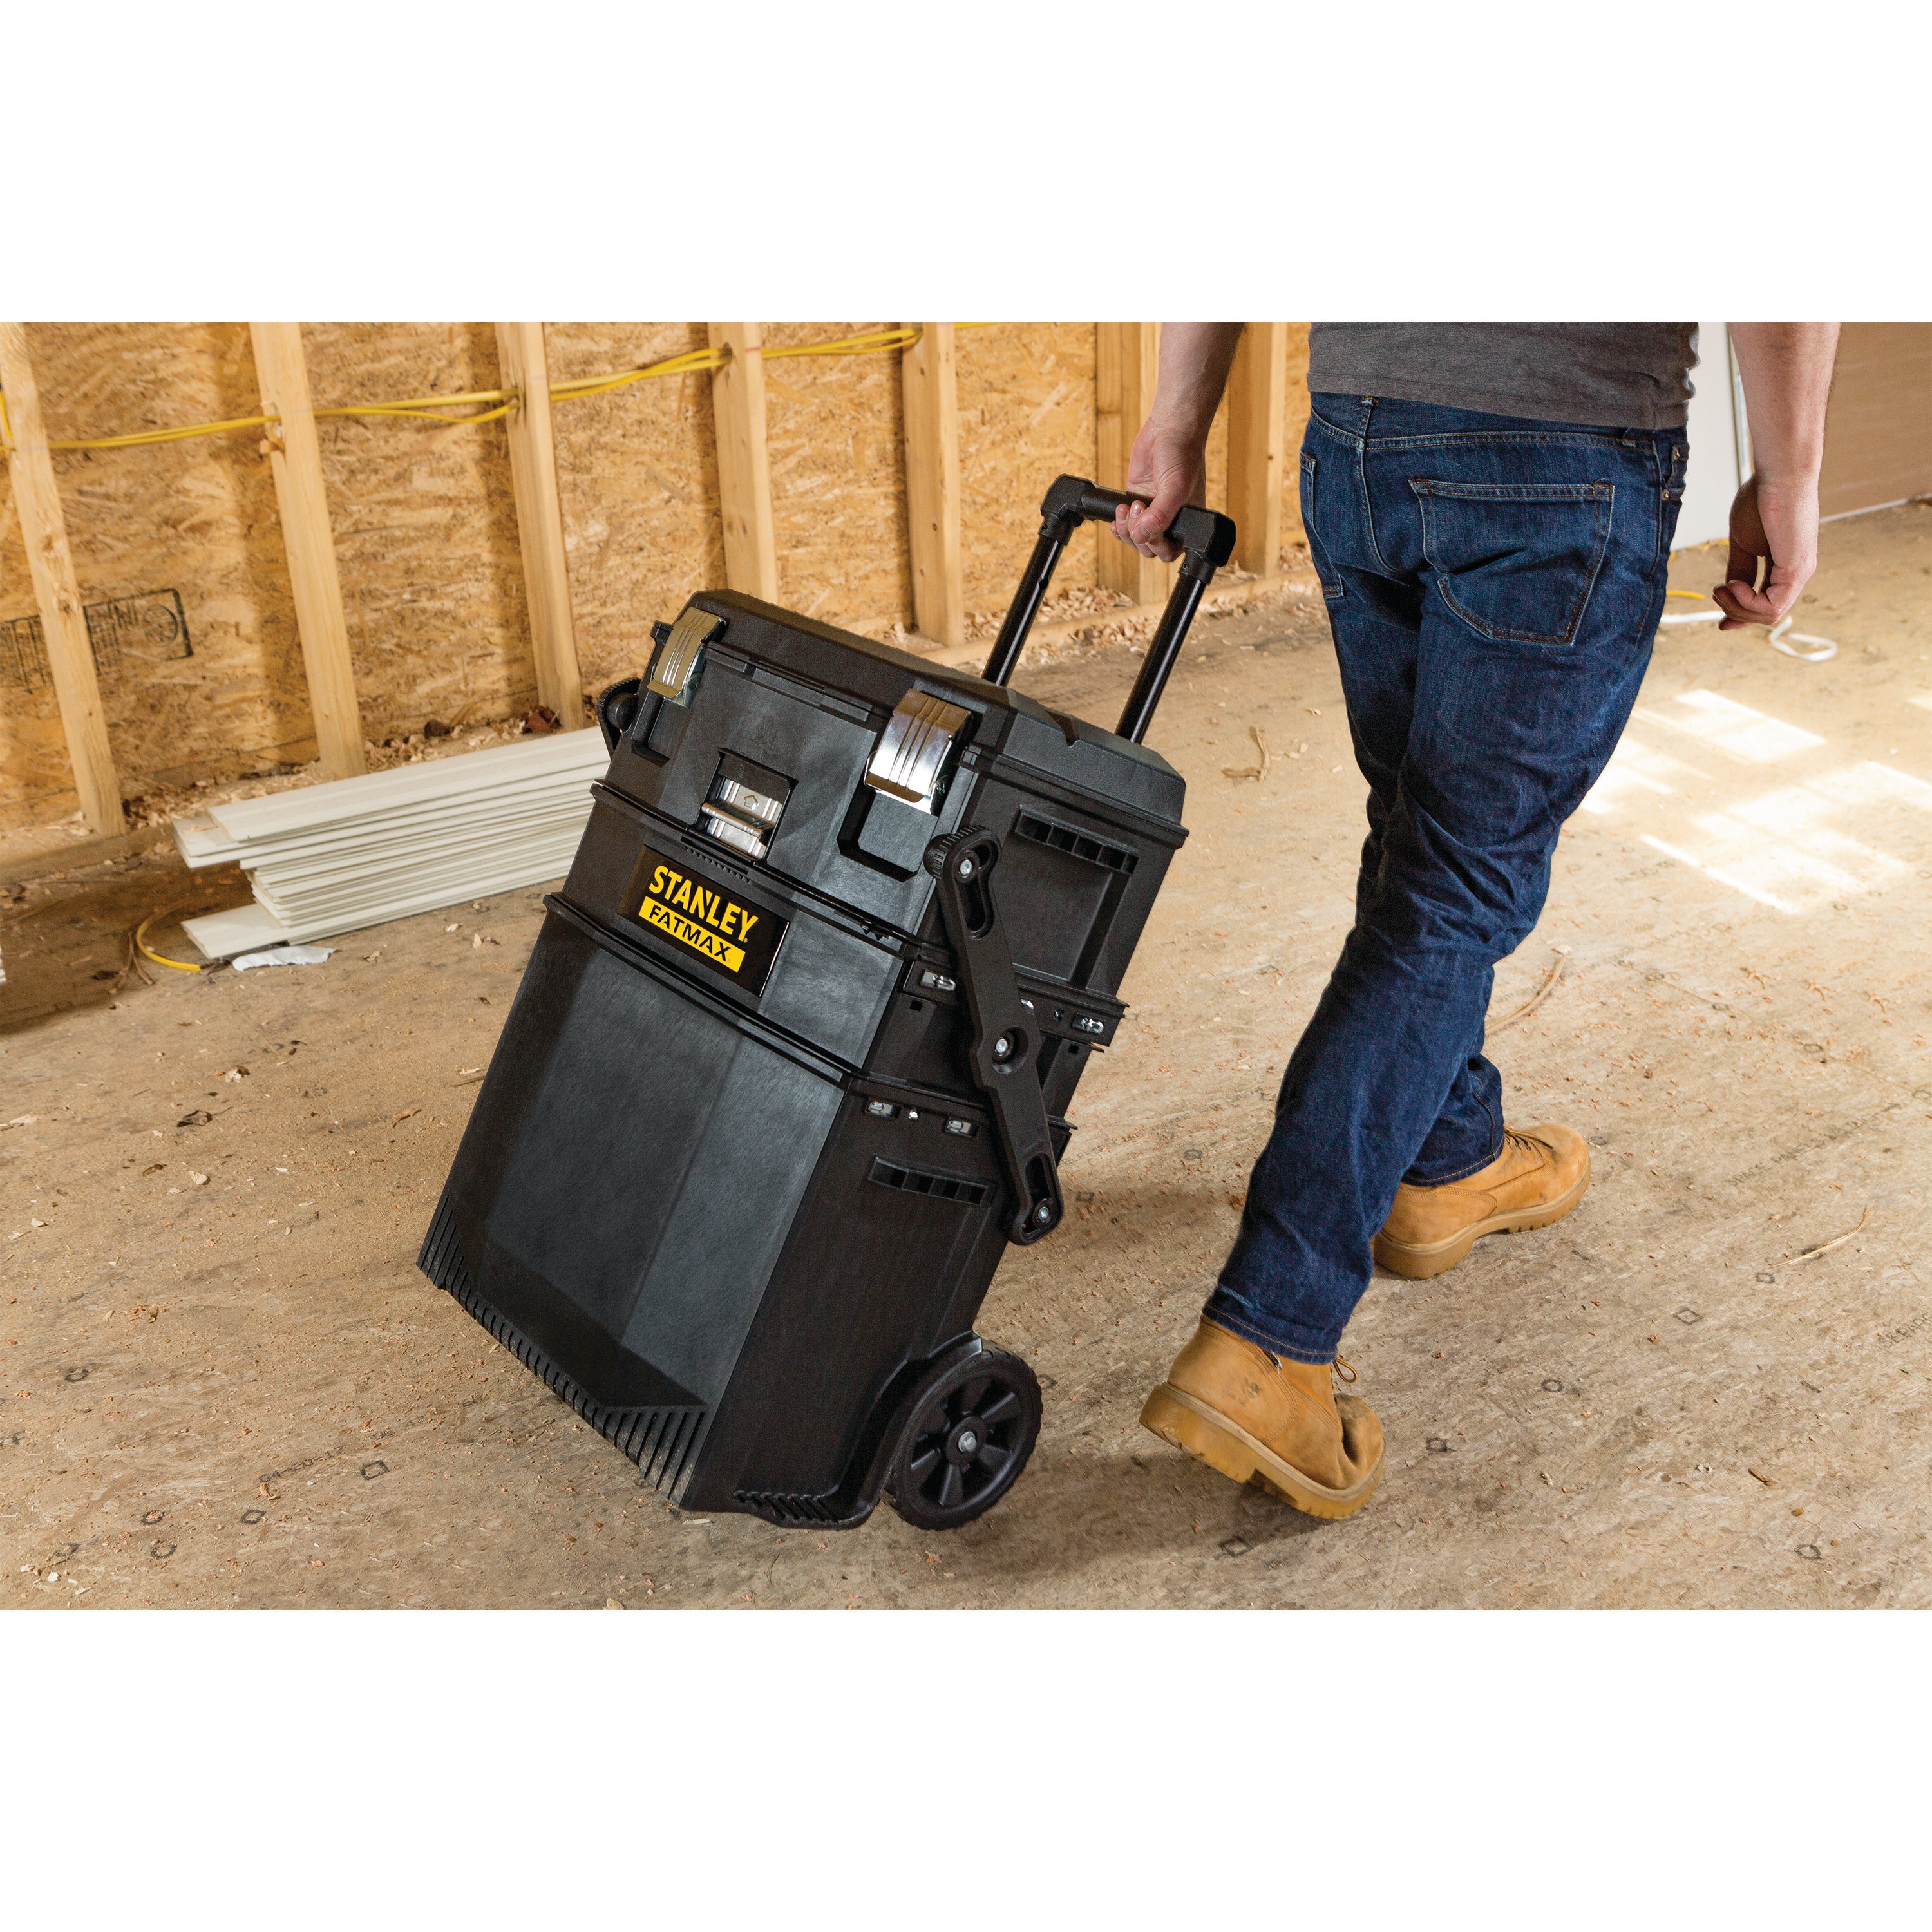 Stanley Tools - FATMAX 4in1 Mobile Work Station - 020800R